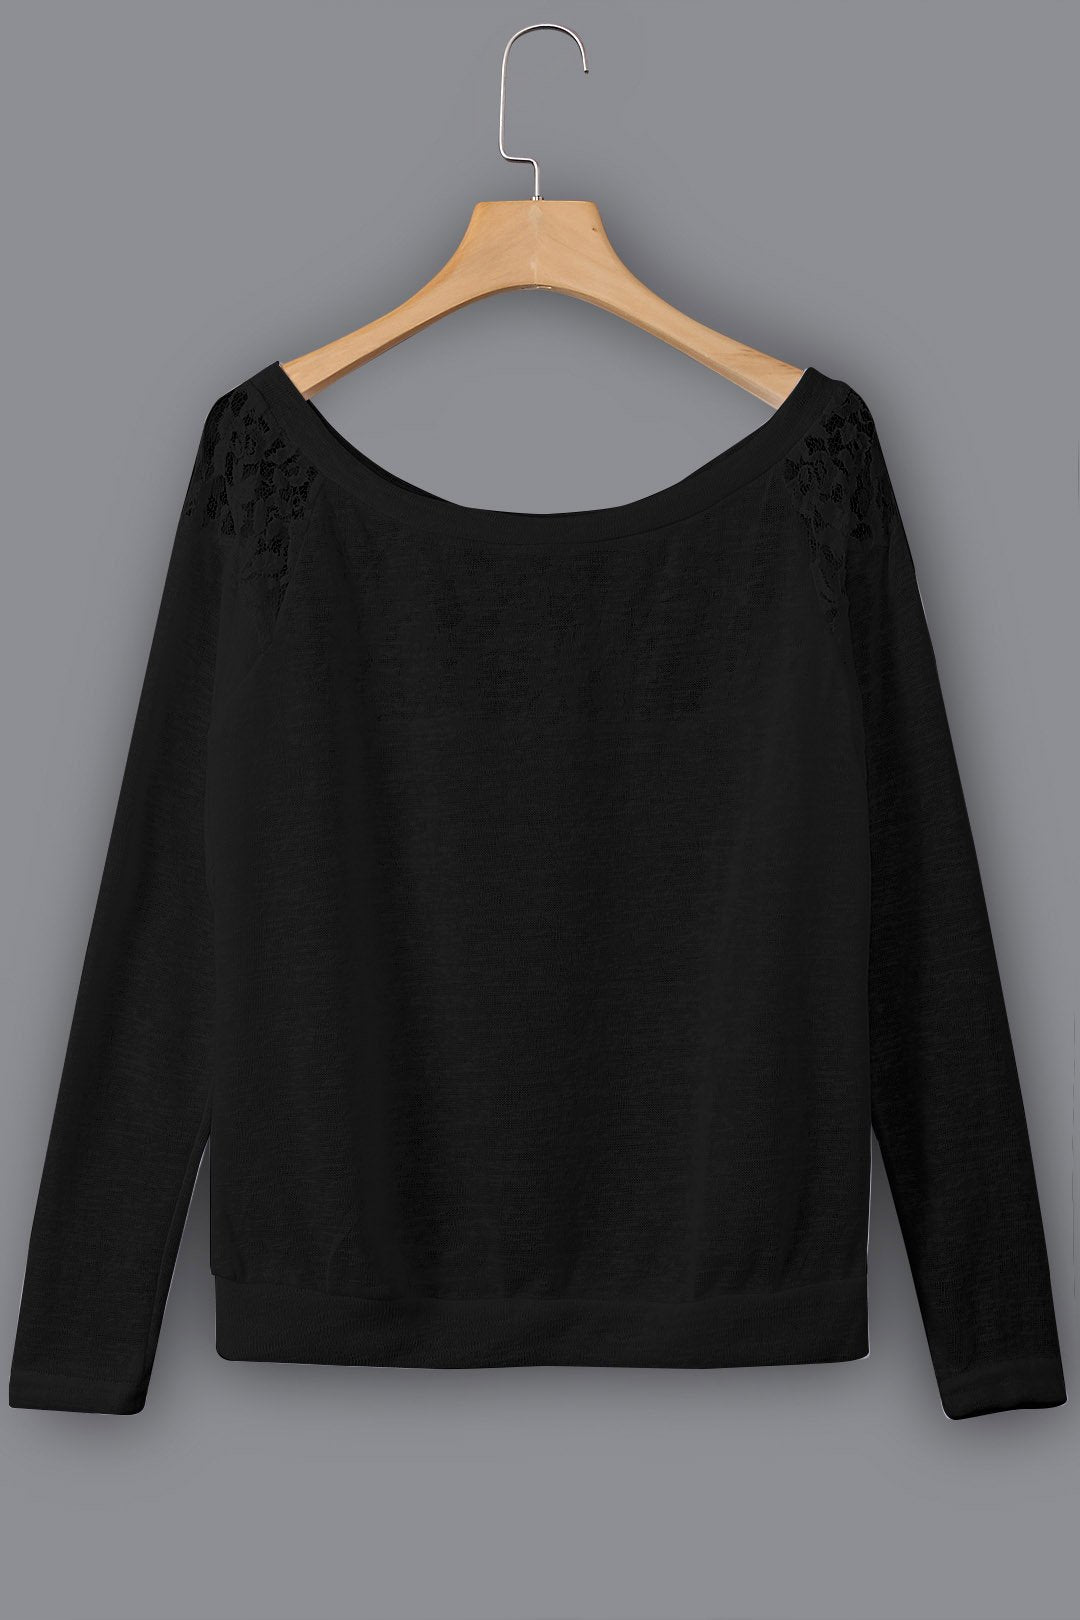 Wholesale Round Neck Lace Hollow Long Sleeve Black Top